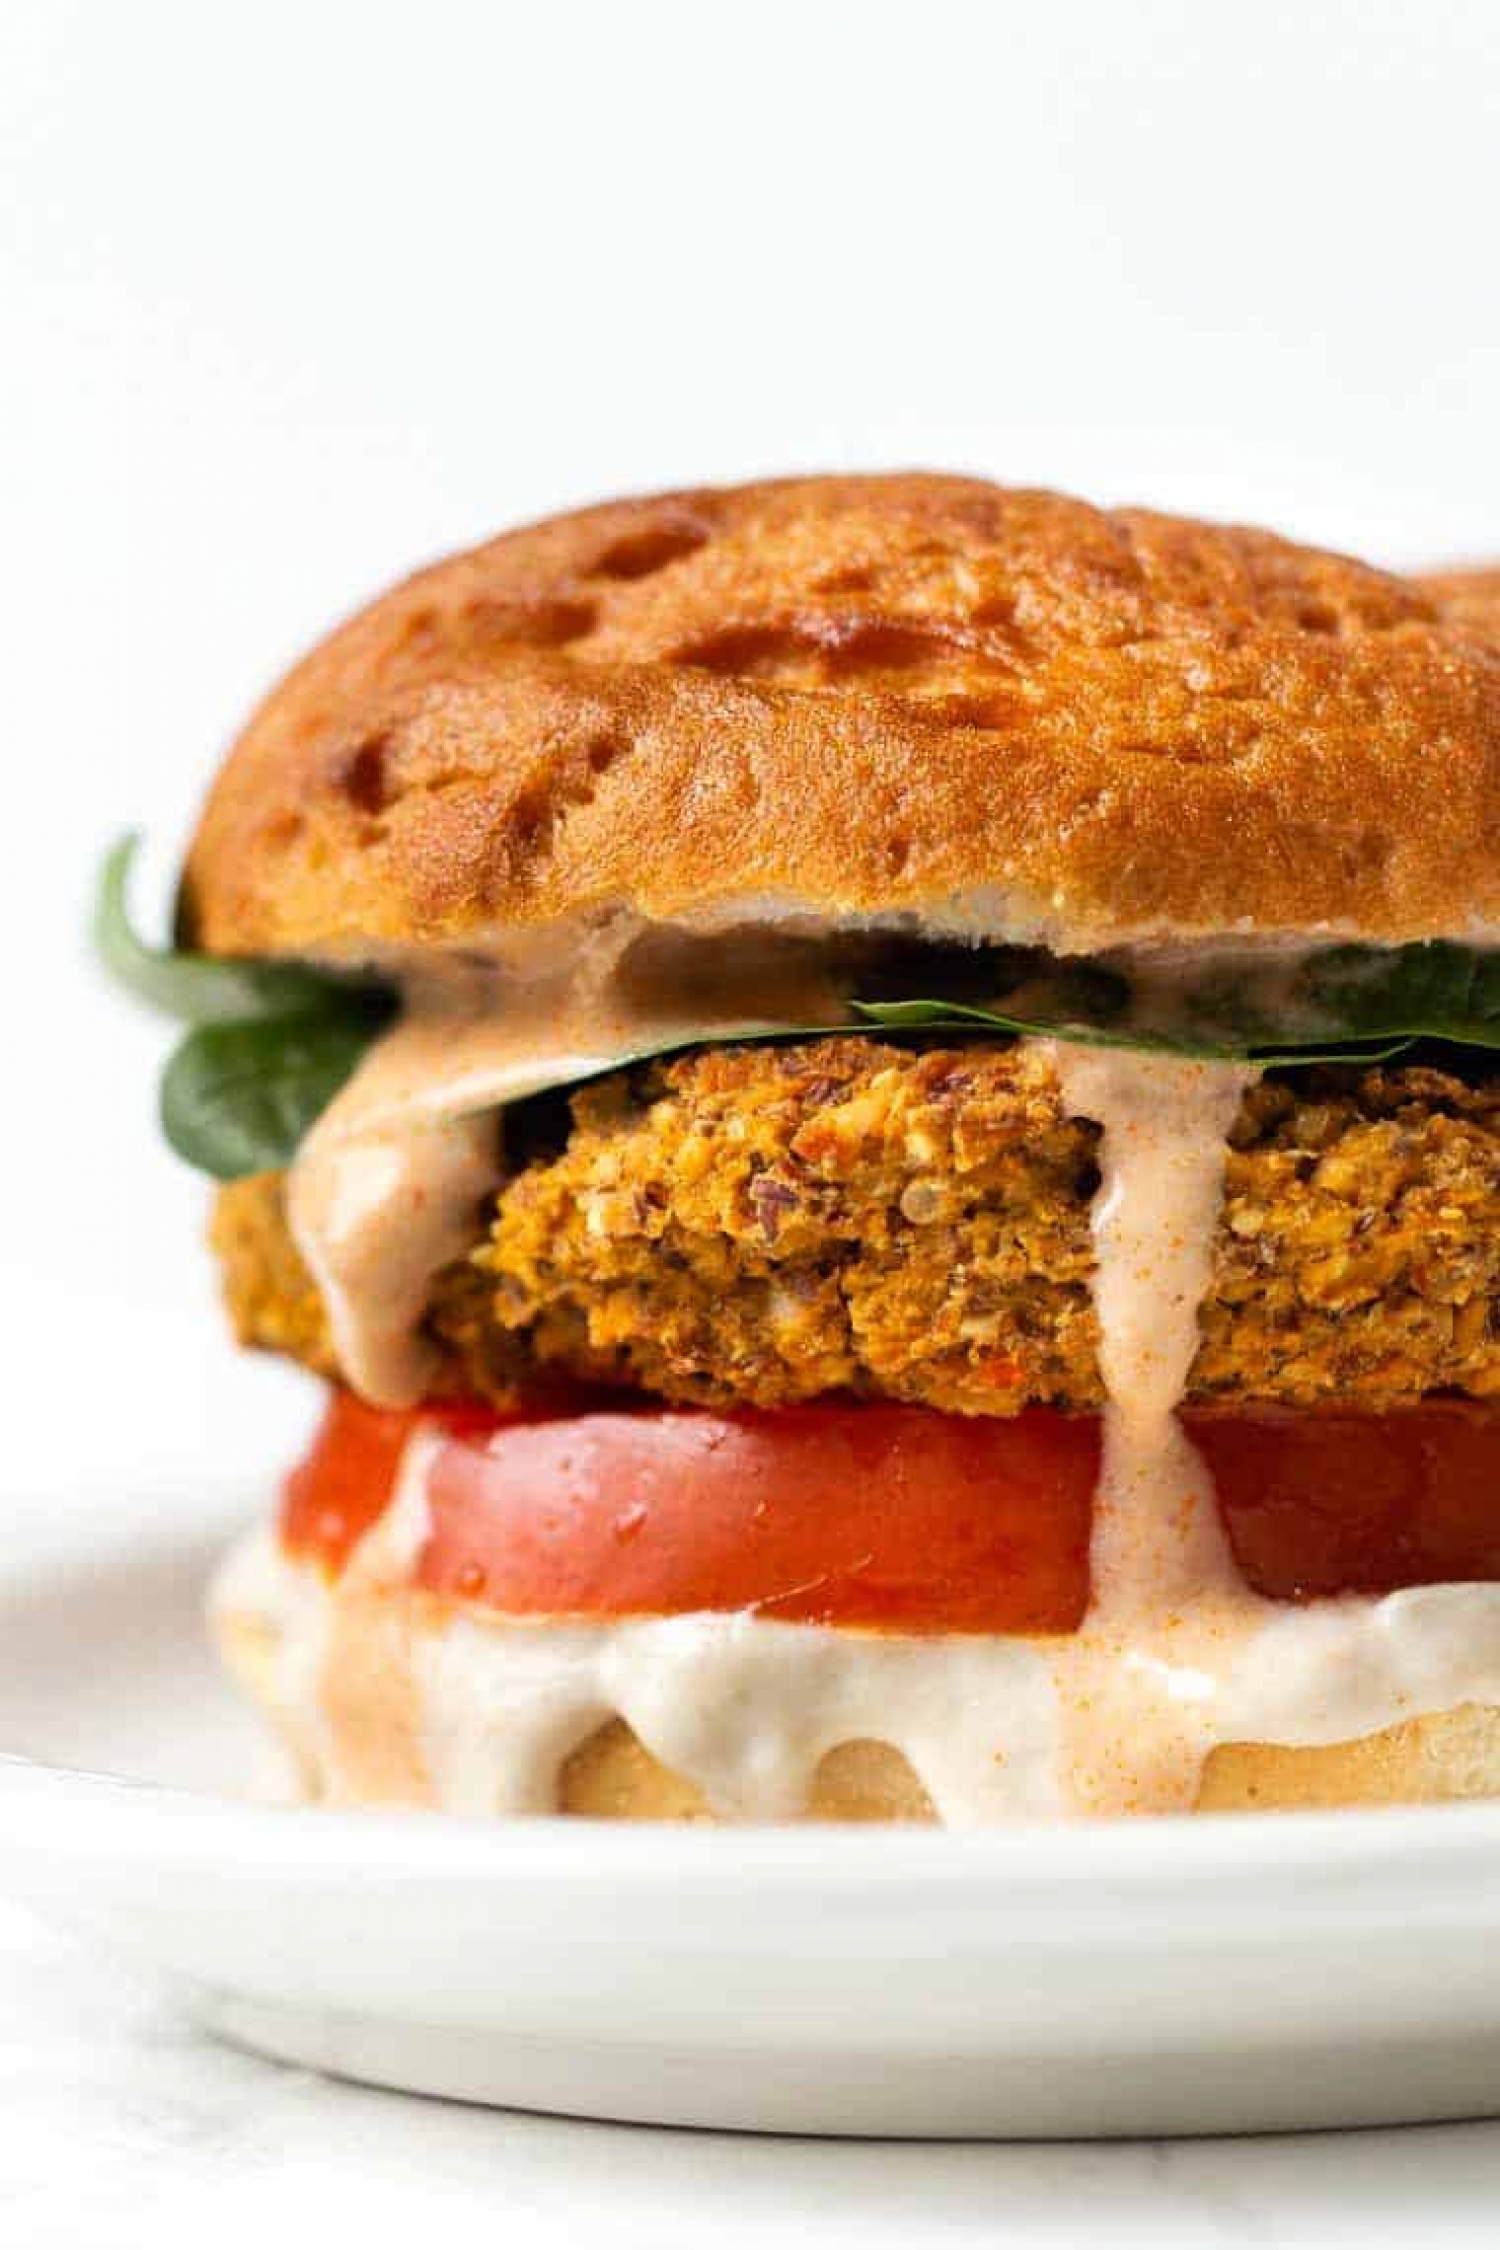 <p>Vegetarians have such a wide variety of choices when it comes to burgers! These spicy baked delights are made with sweet butternut squash, chipotles in adobo sauce and white beans for extra fiber and protein. They come together quickly and easily in a food processor and will satisfy even the most picky carnivores. <a href="https://www.simplyquinoa.com/butternut-squash-white-bean-burgers/" rel="noopener">Get the recipe here.</a></p>